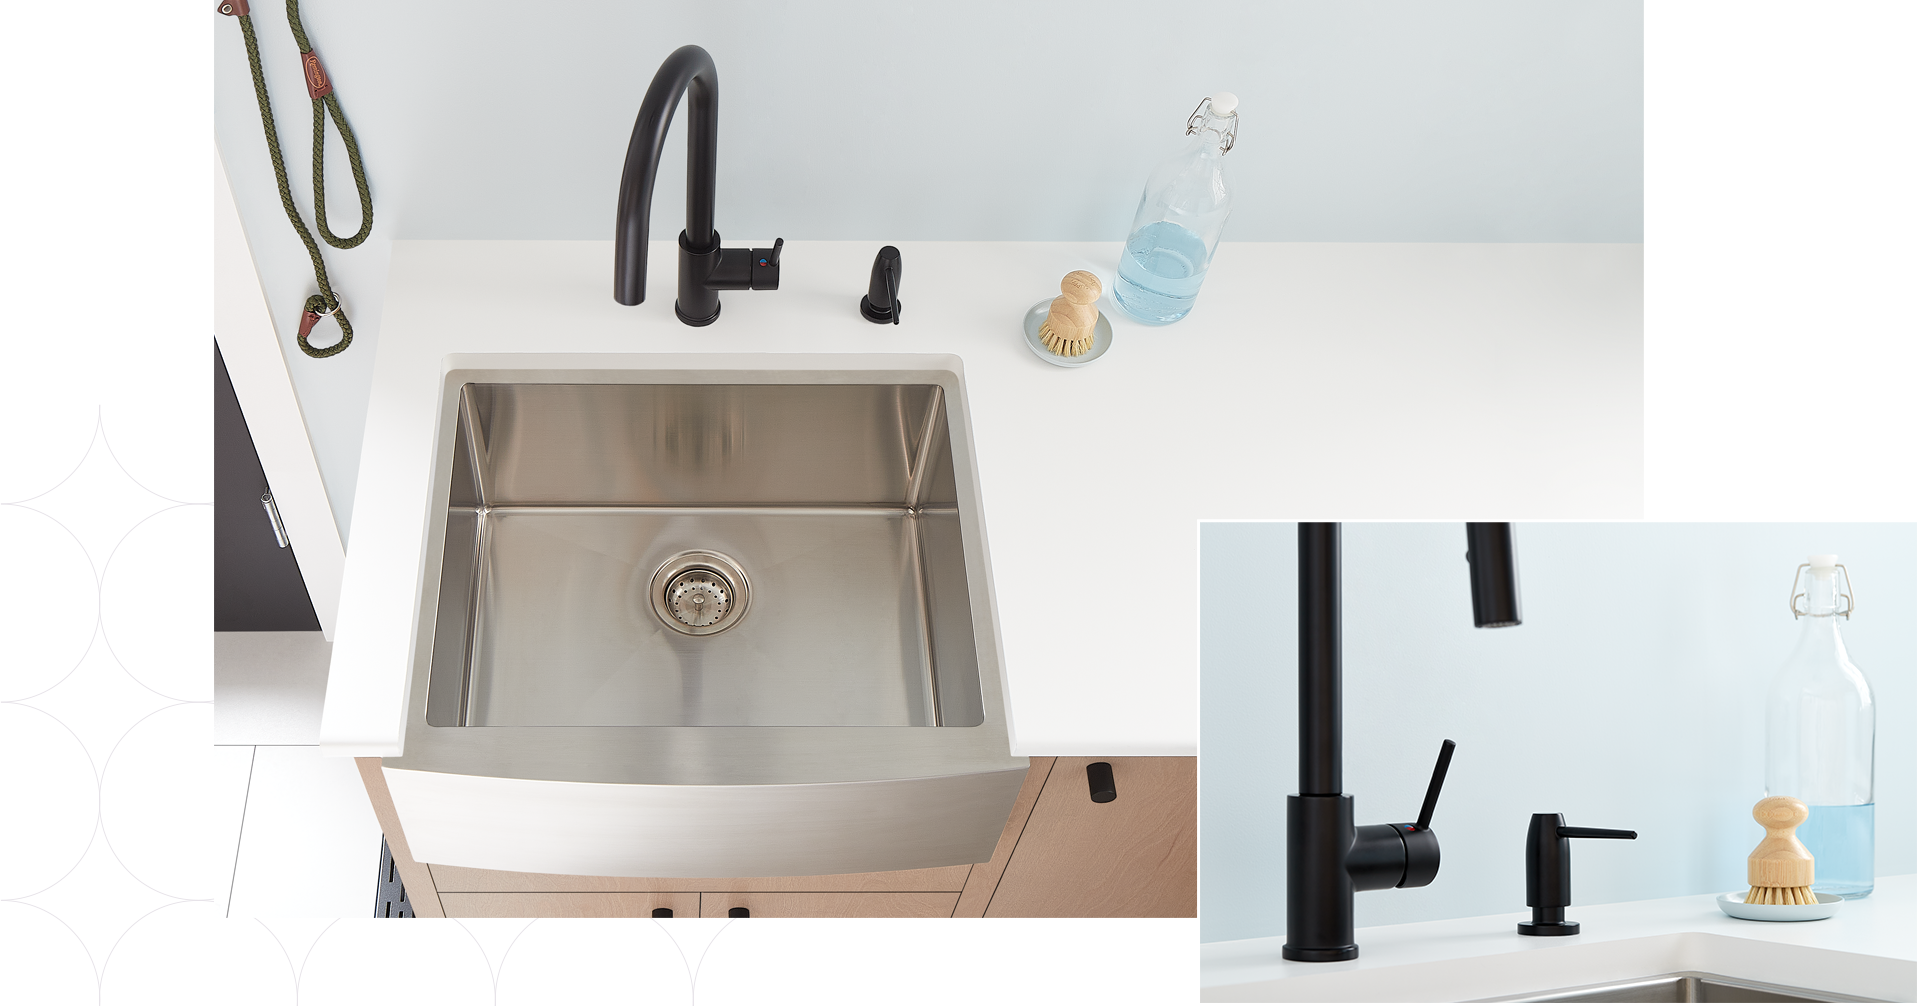 Ravenel Pull-Down Kitchen Faucet, Contemporary Soap or Lotion Dispenser Matte Black, 24" Fournier Stainless Steel Farmhouse Sink